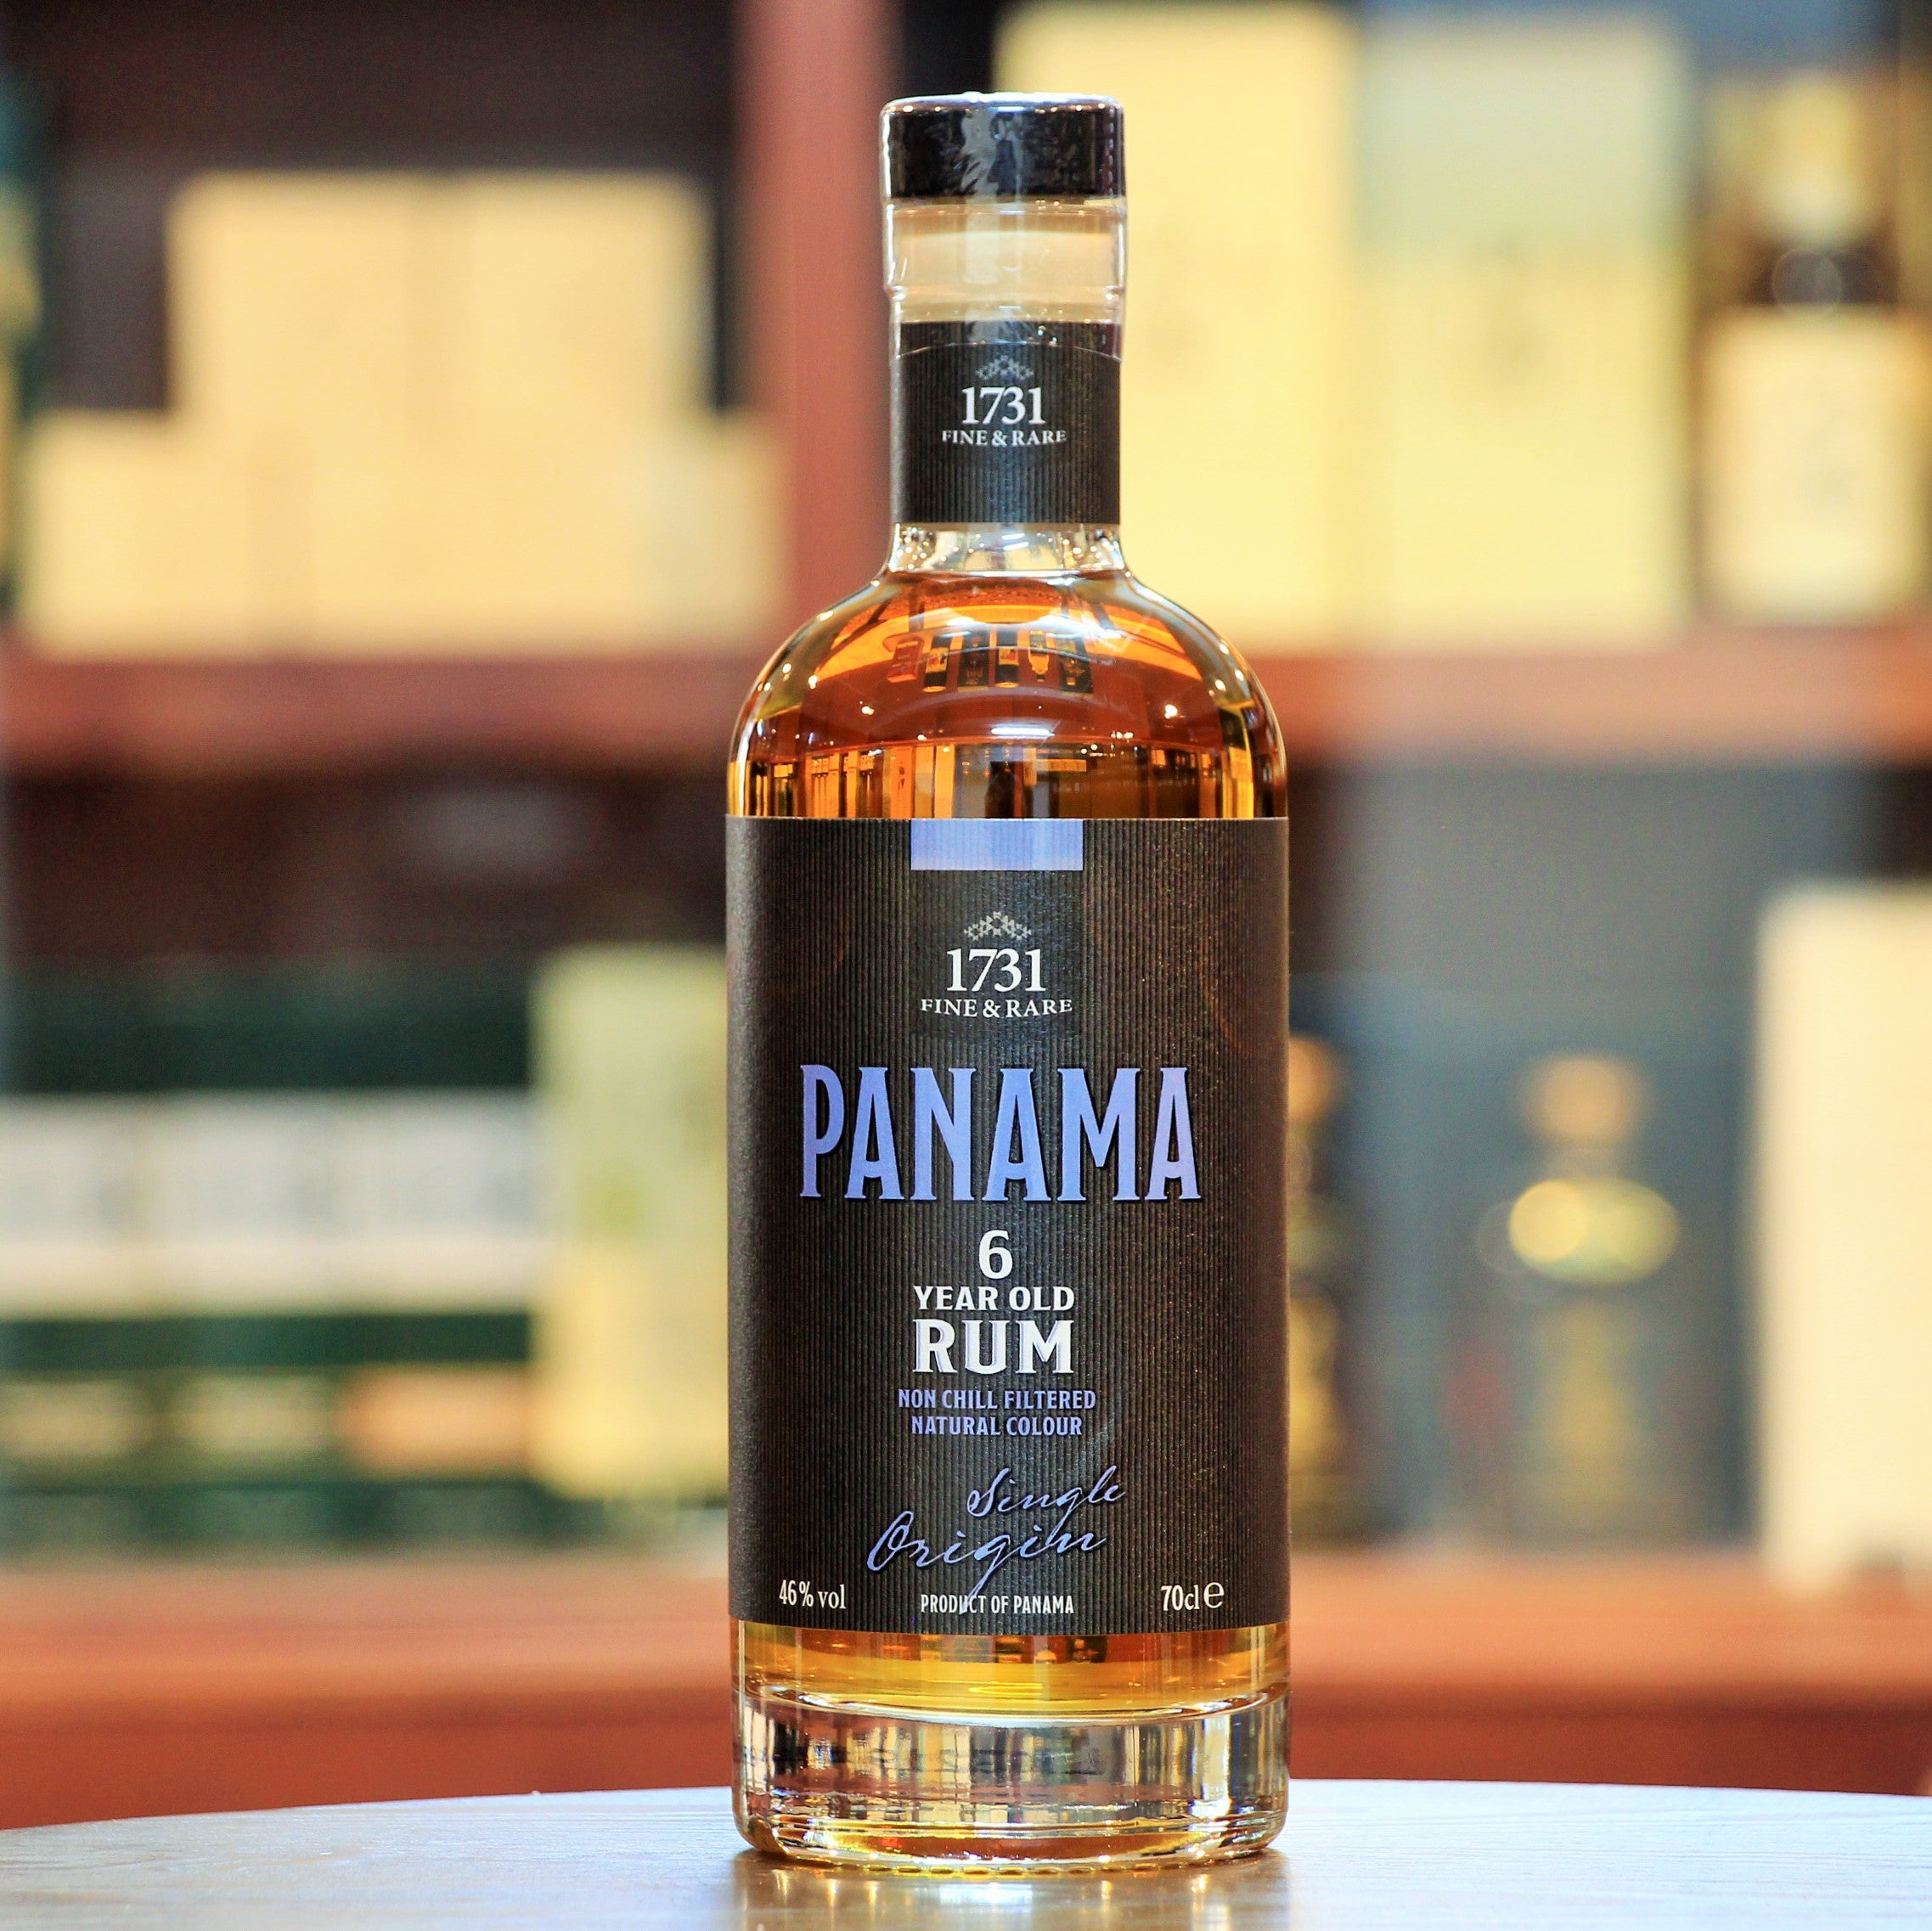 Panama Rum 6 Year Old, Aged for a minimum of 6 years in ex-bourbon oak barrels, this blend of rum of Panama offers coffee beans, cherries and coconut on the nose with a long spicy and sweet finish.  